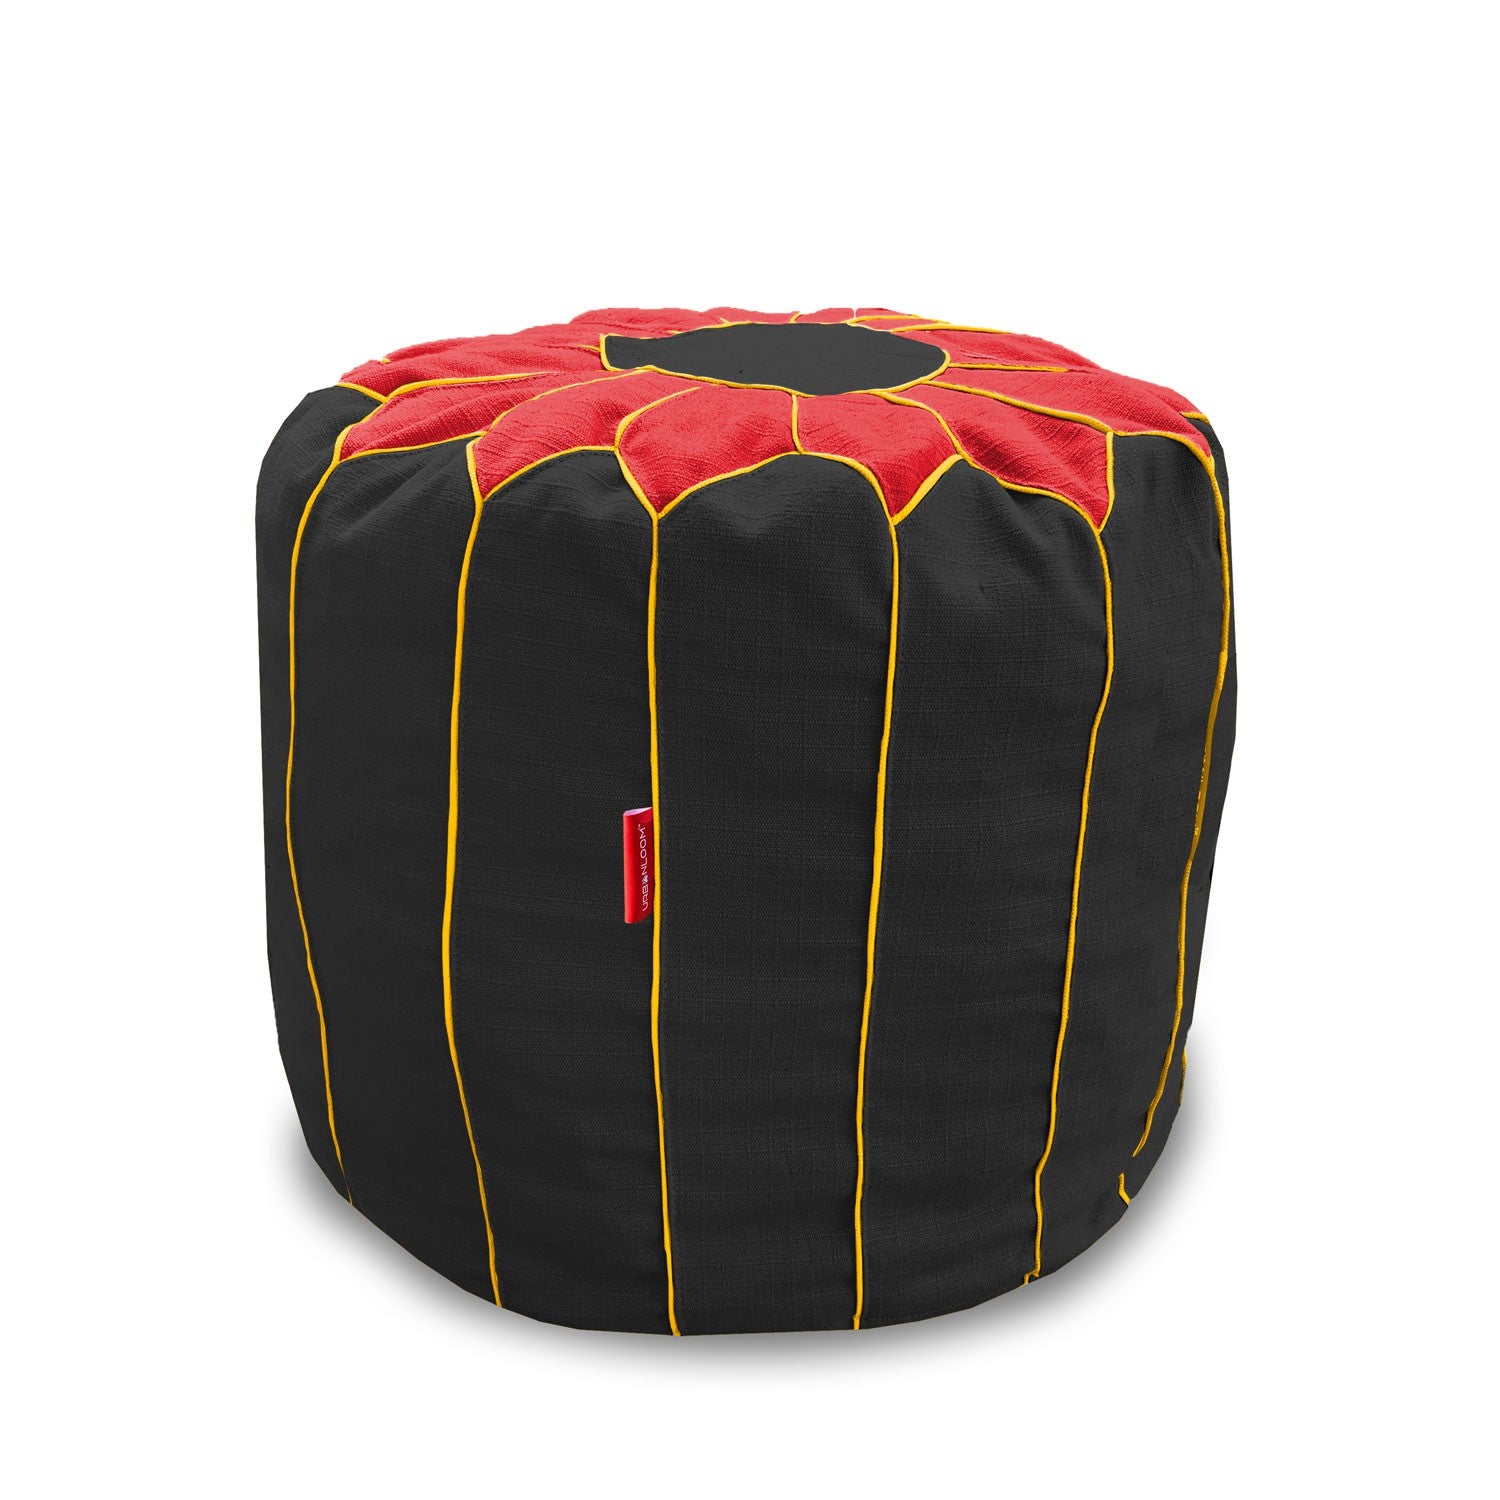 Cotton Handloom Moroccan Pouf cover , Red & Black